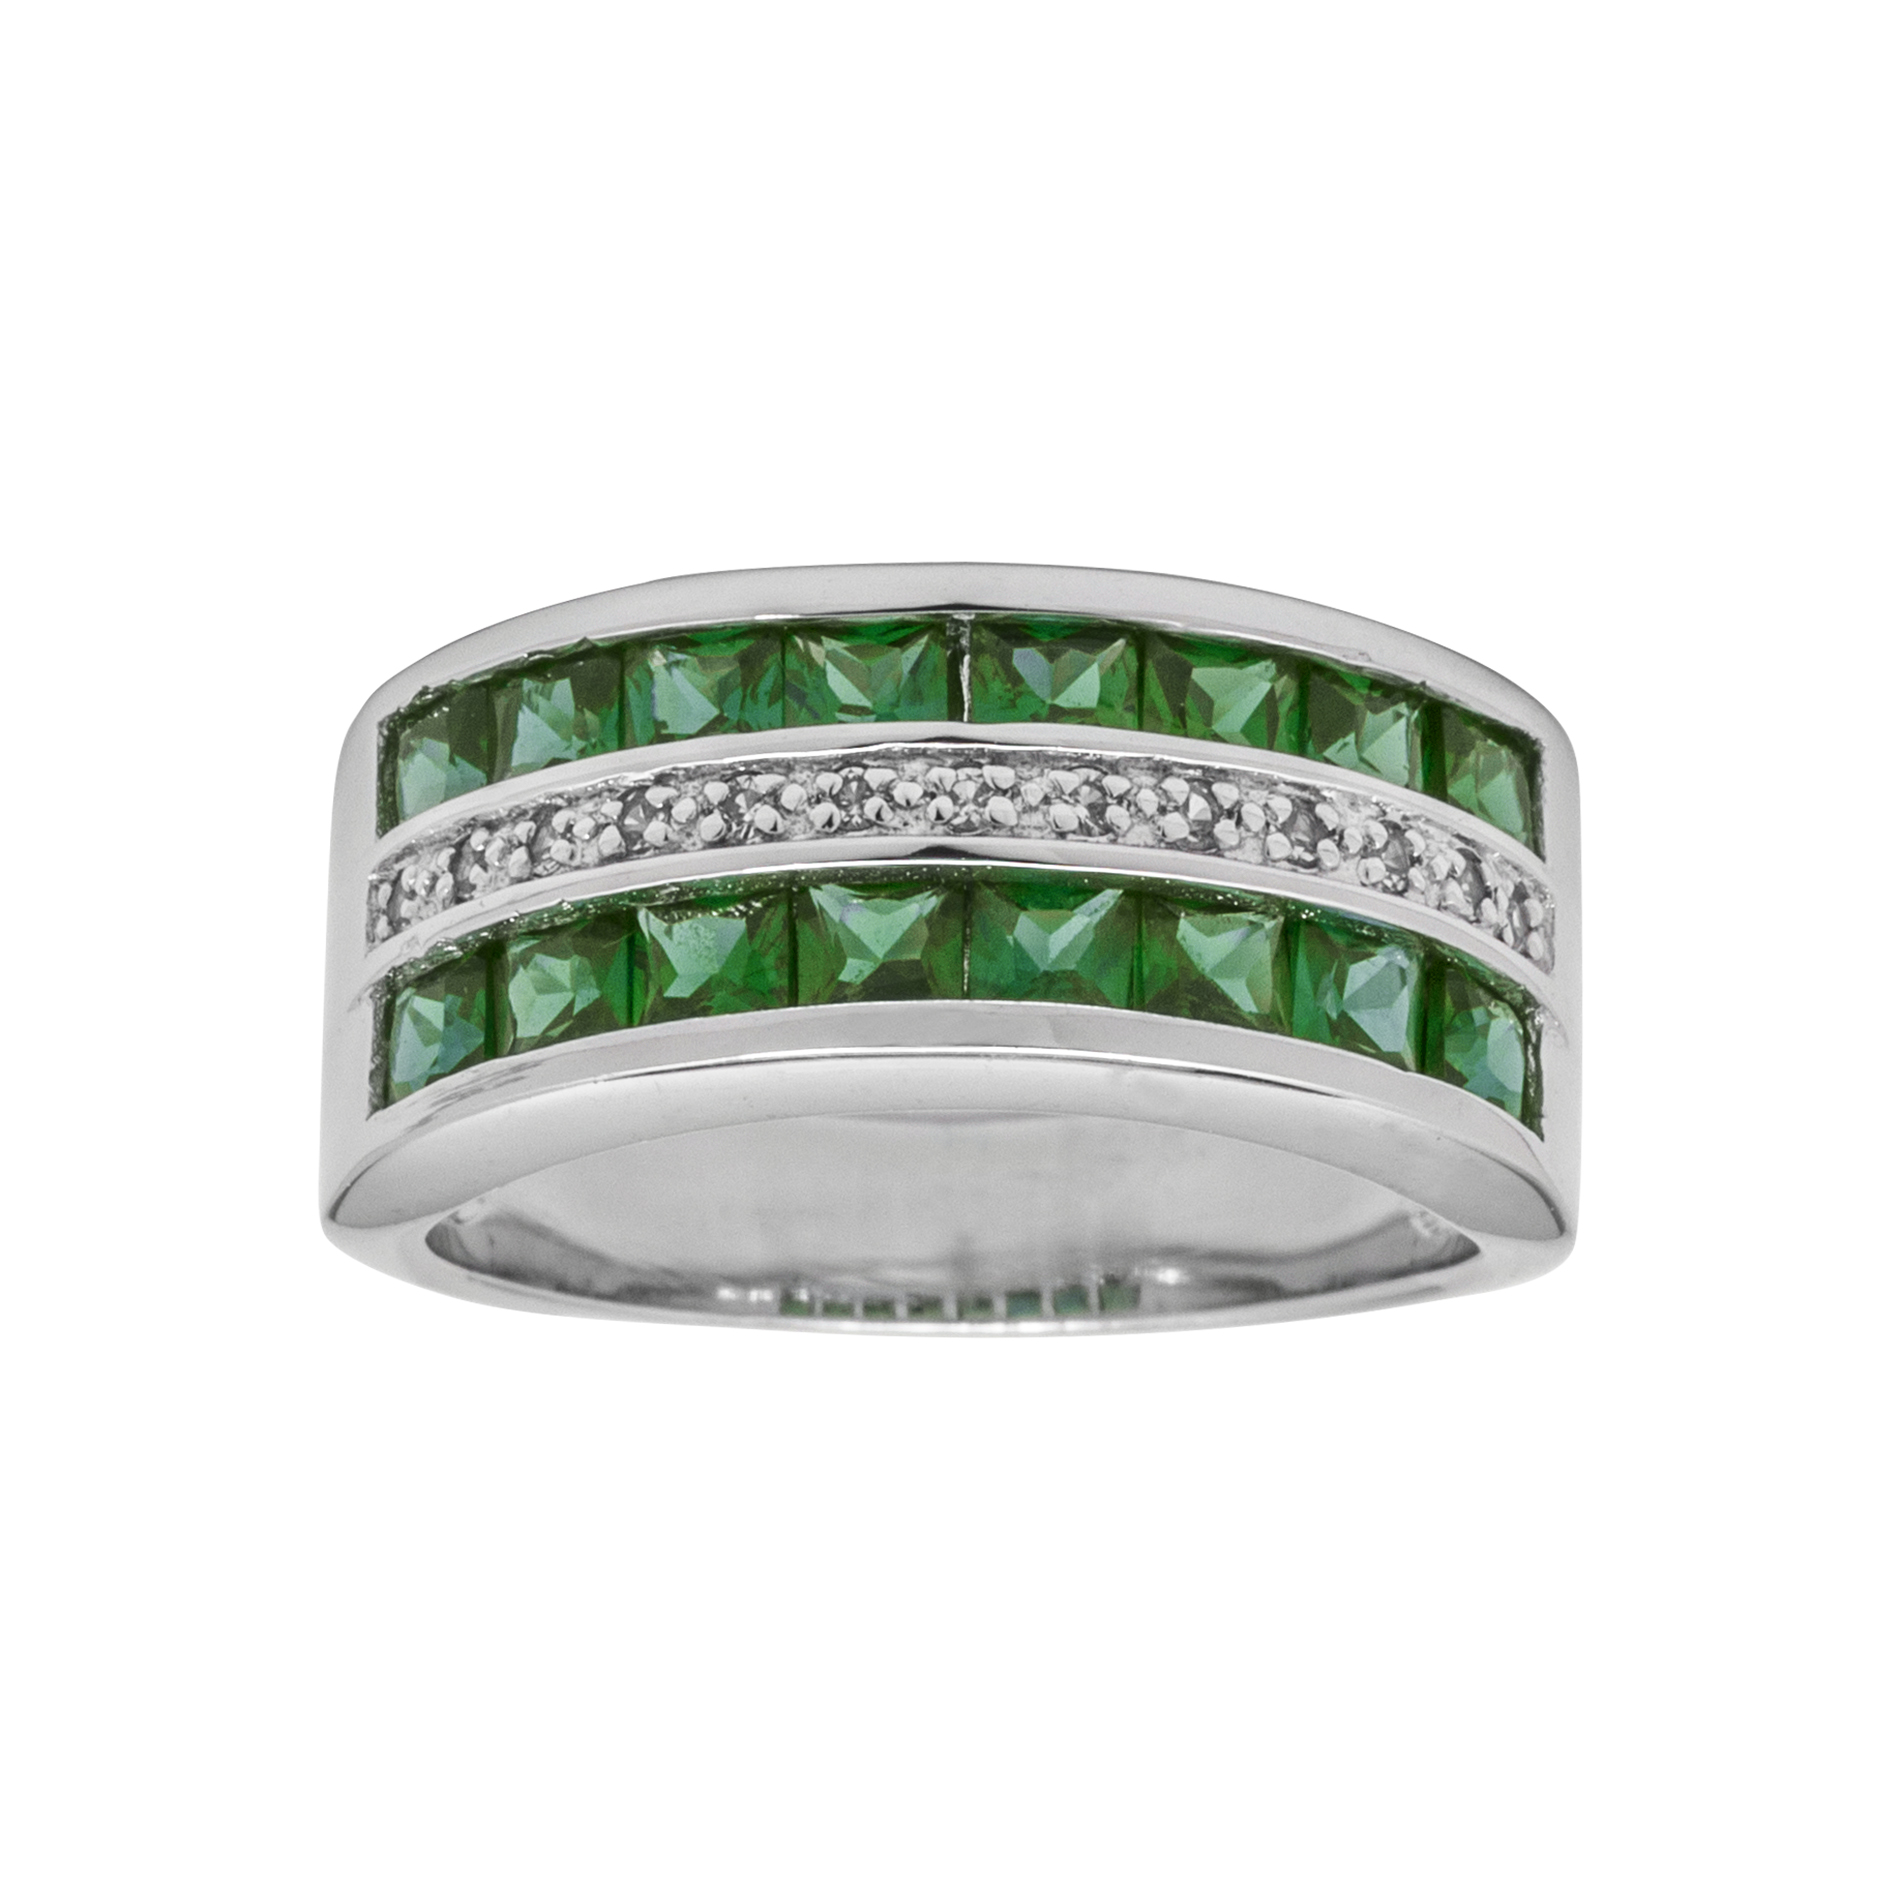 Simulated Emerald 3-Row Band Sterling Silver